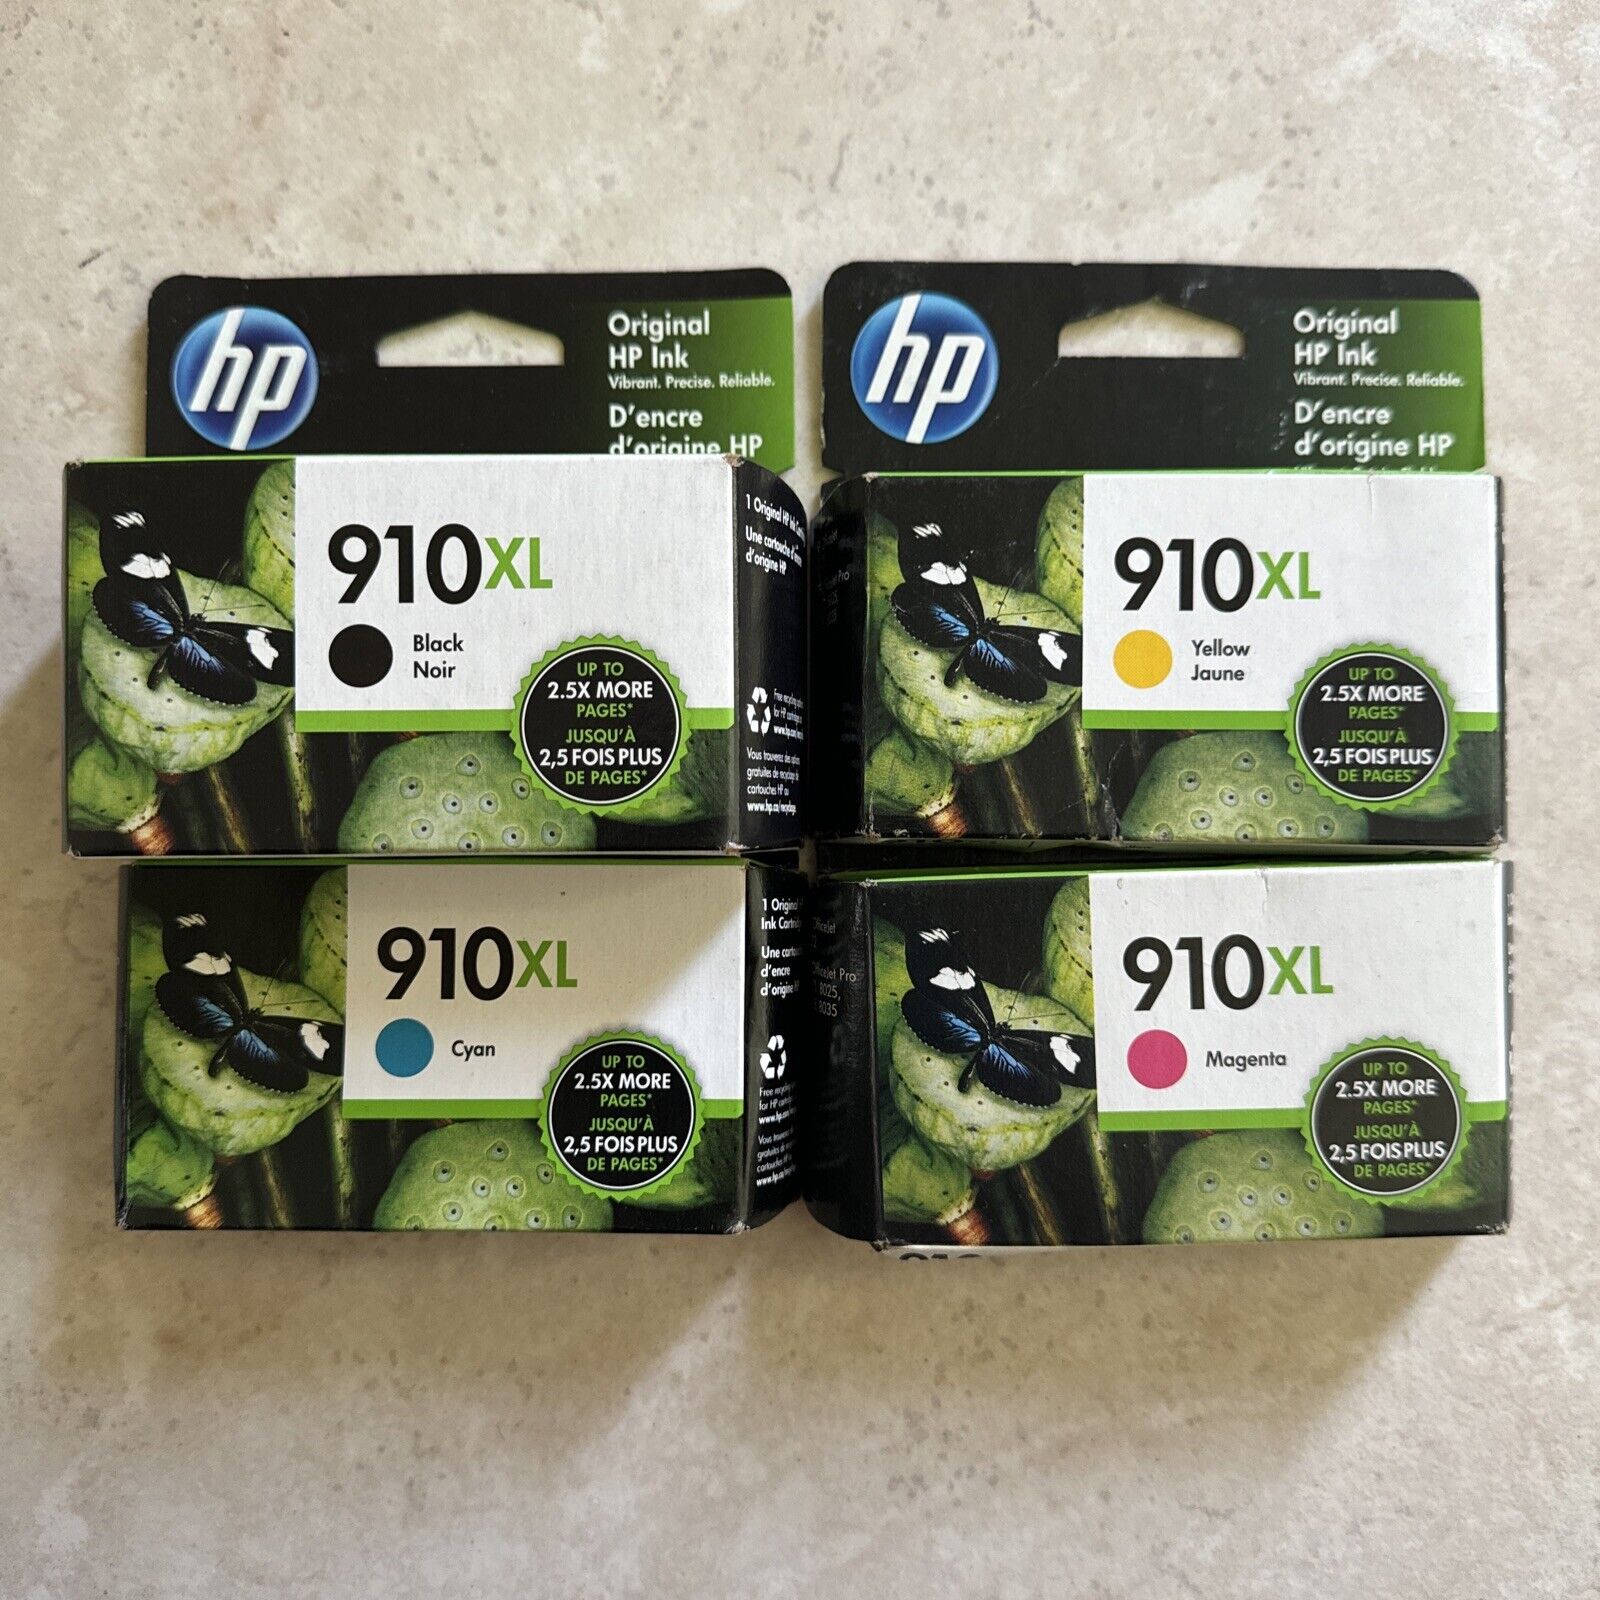 x4 New OEM HP 910XL Black Color Ink set 910 XL 8020 8025 4 Pack In Box Exp 22-23